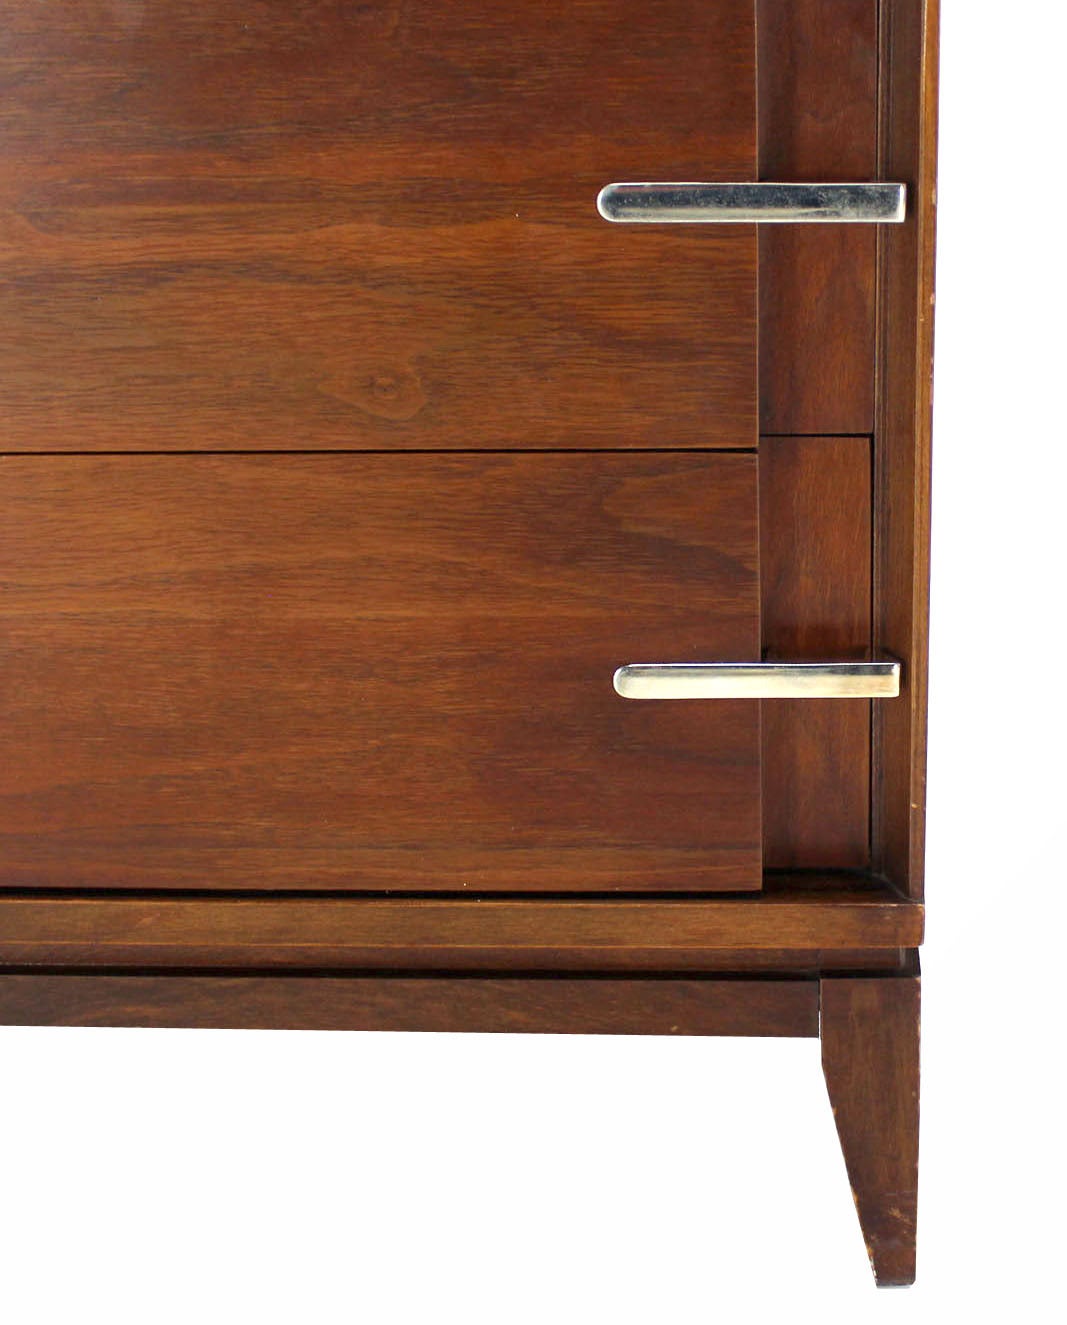 Mid-Century Modern Walnut Bachelor Chest or Dresser with Accent Drawer Pulls 1